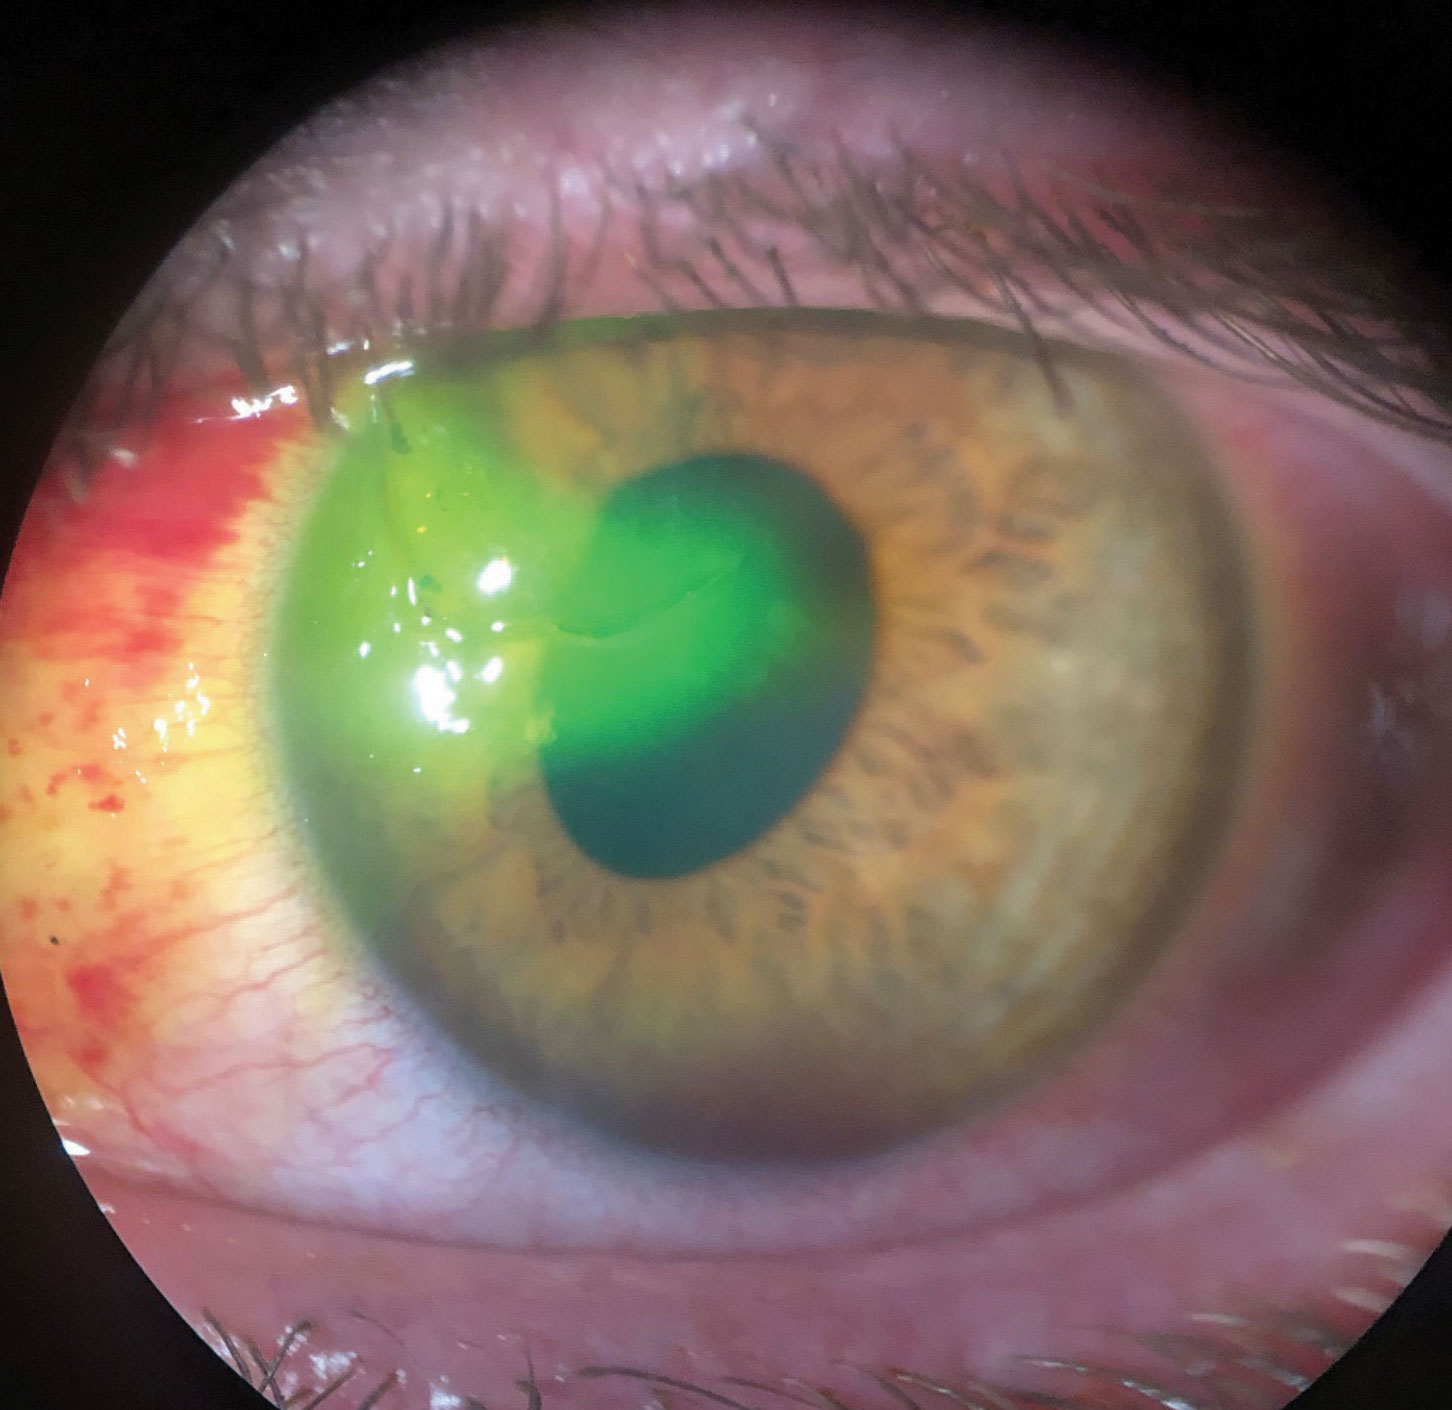 This patient suffered a traumatic corneal laceration after a mishap with a screwdriver. Note the sodium fluorescein being pulled into the stroma and the oblong pupil.